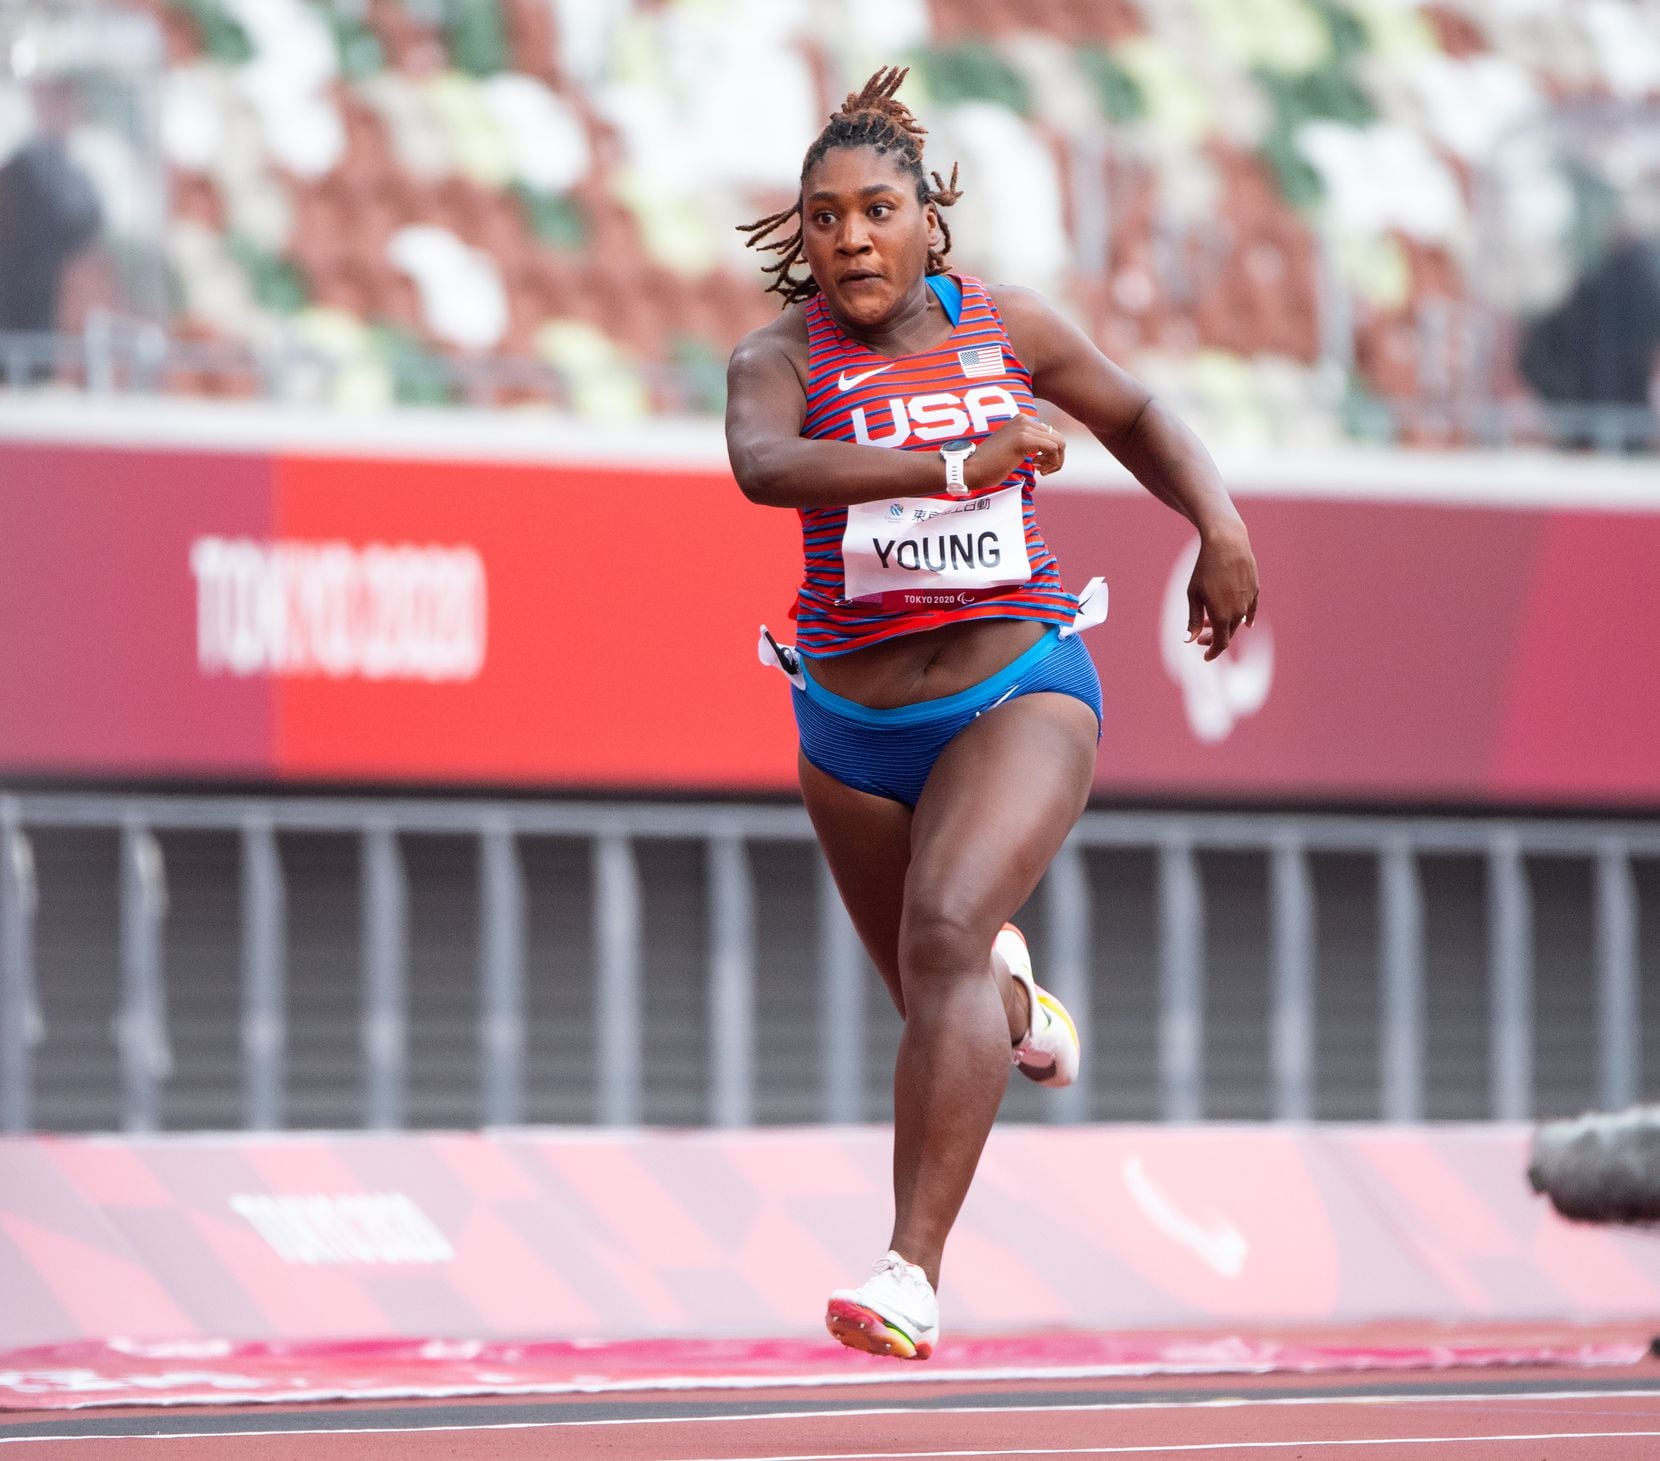 Team USA's Deja Young-Craddock runs in a heat of the 100m August 31, 2021 at the Olympic...